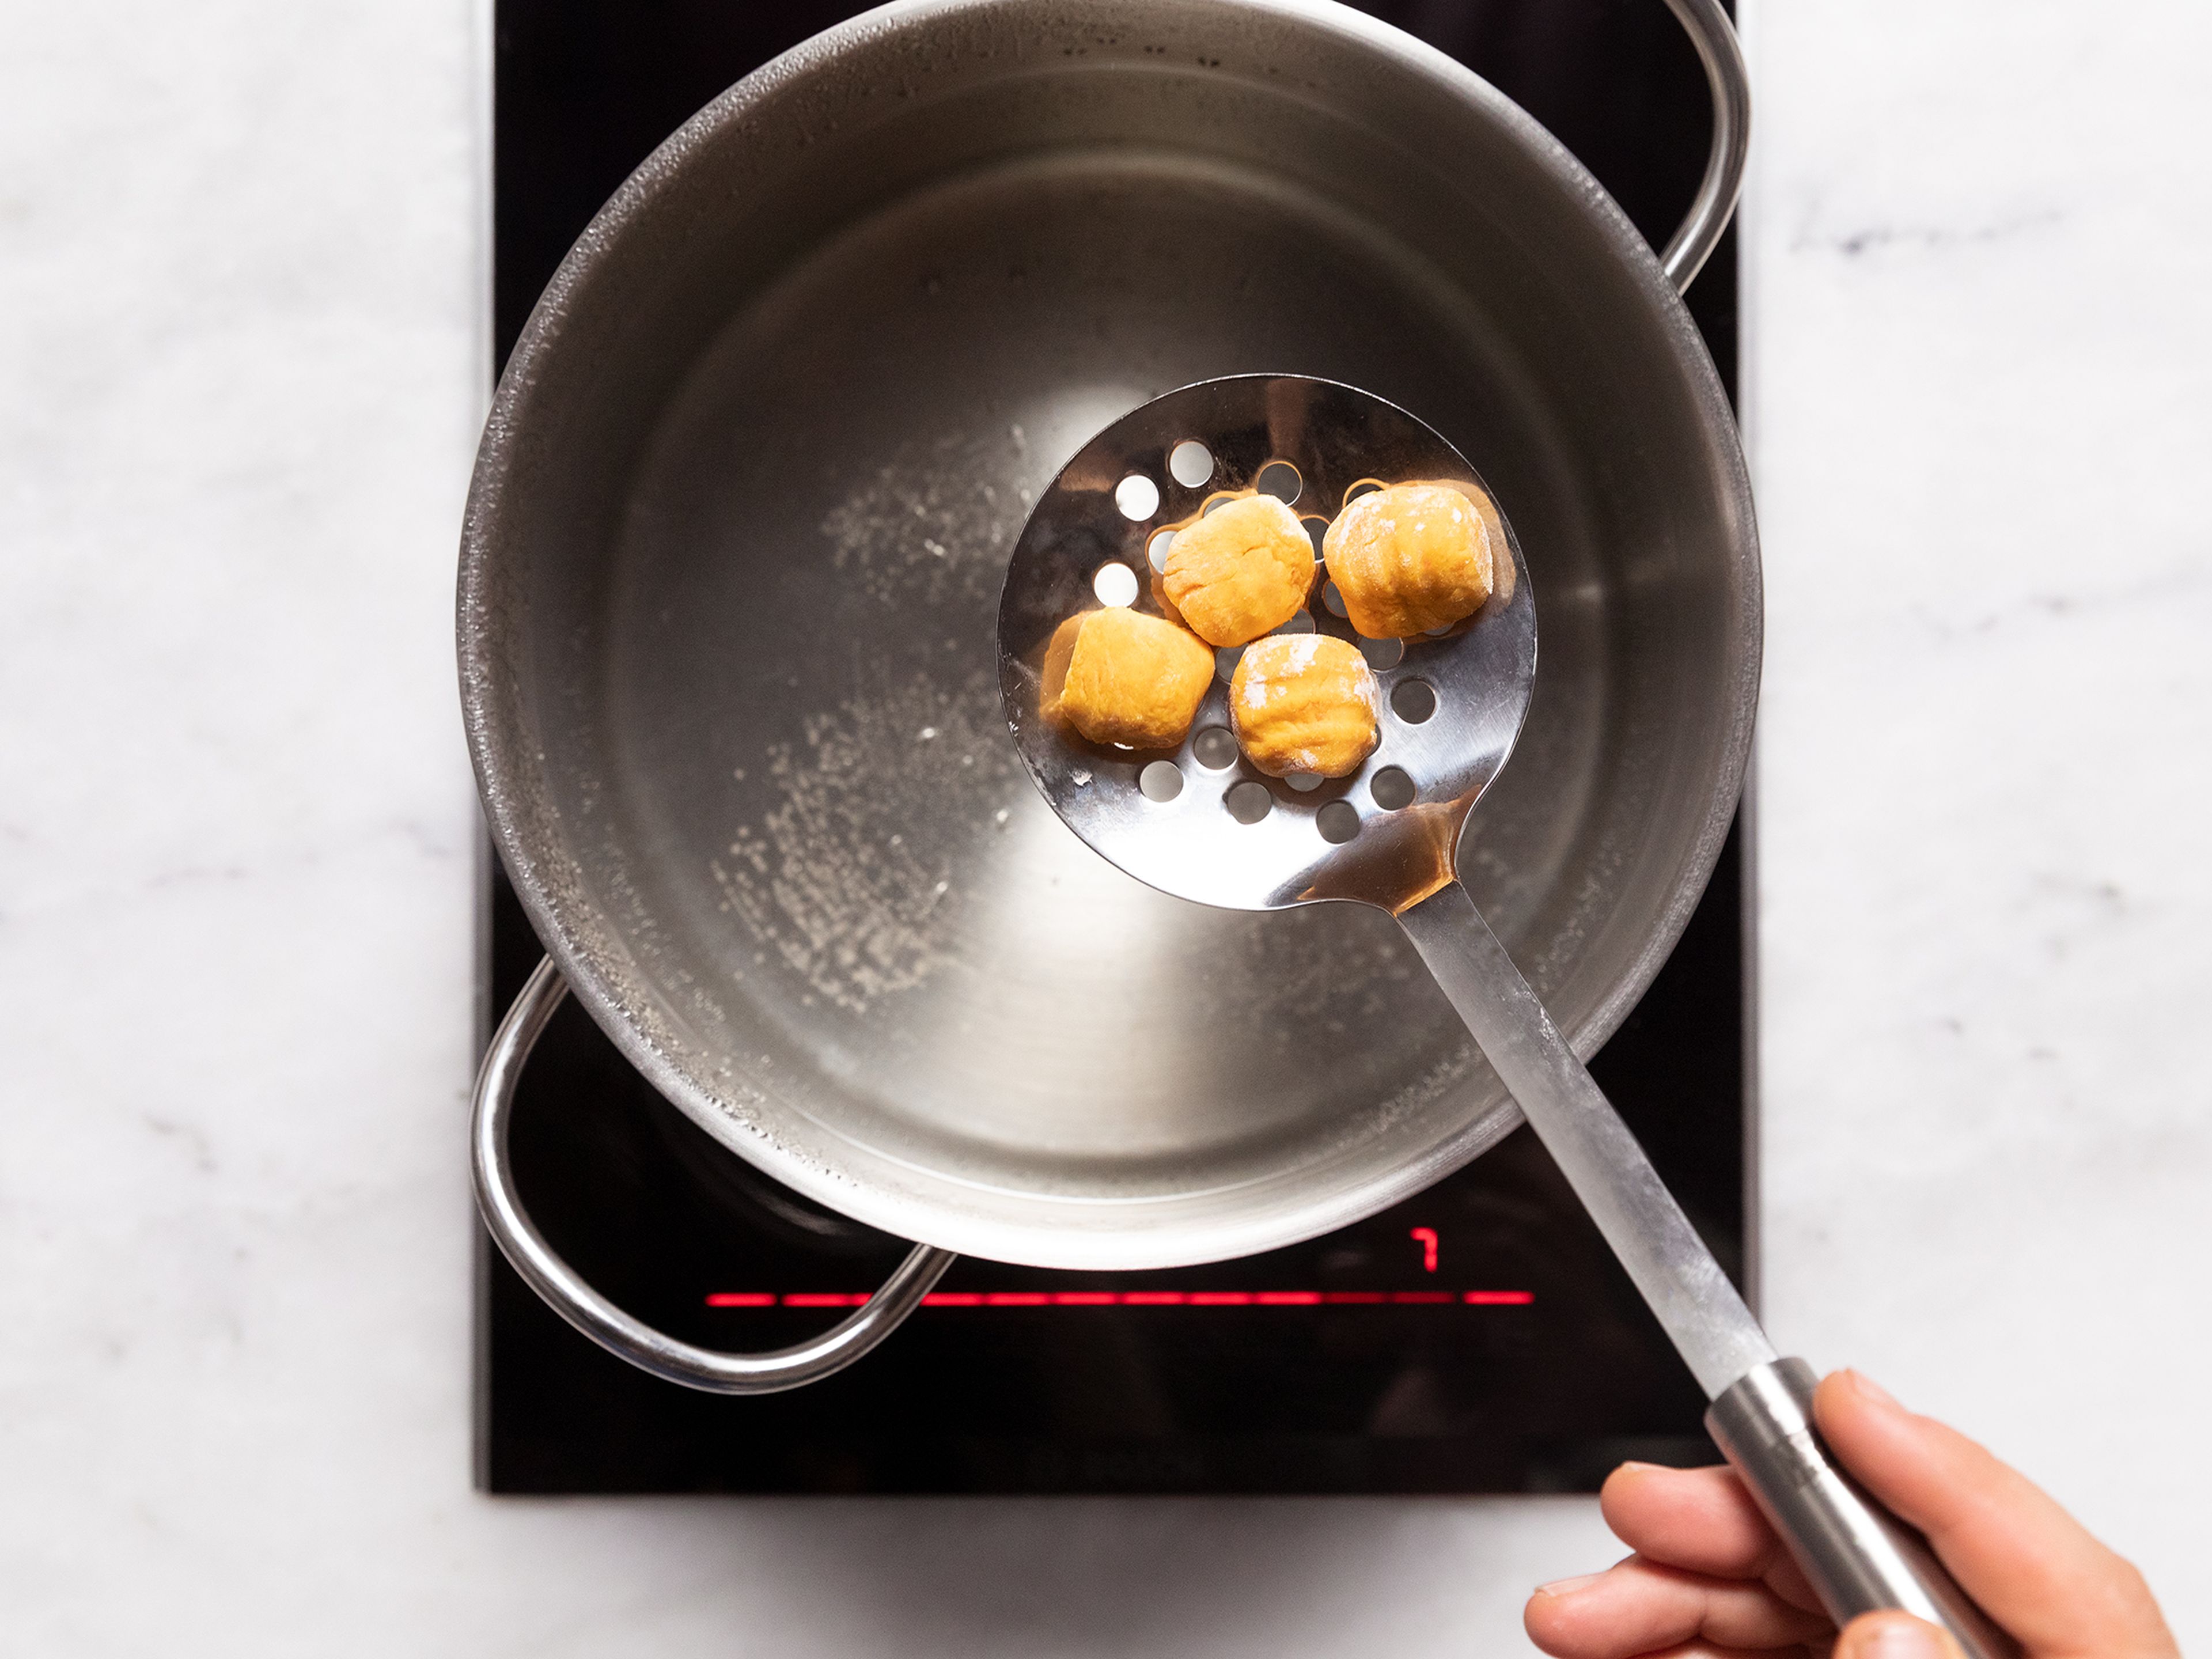 Bring a large pot with salted water to a boil. One after another, transfer gnocchi into the boiling water. Once they float, they’re ready, and can bet gently removed using a slotted spoon.